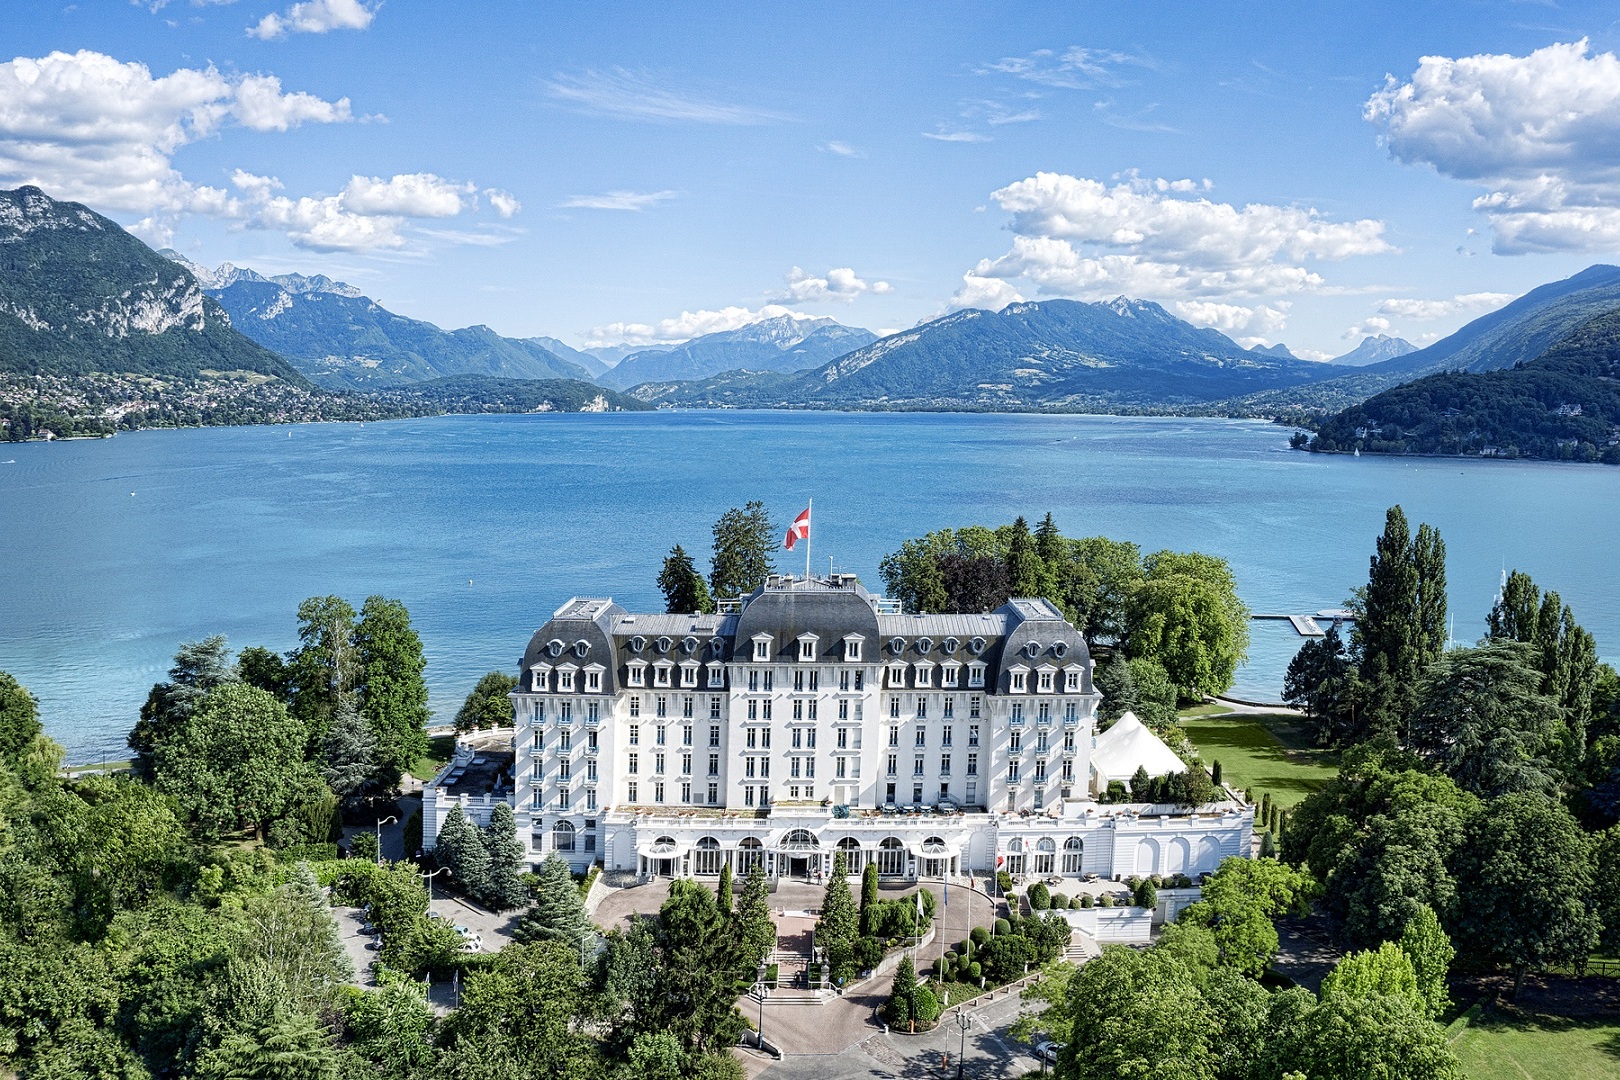 Imperial palace Annecy seminaires incentive Rhones Alpes